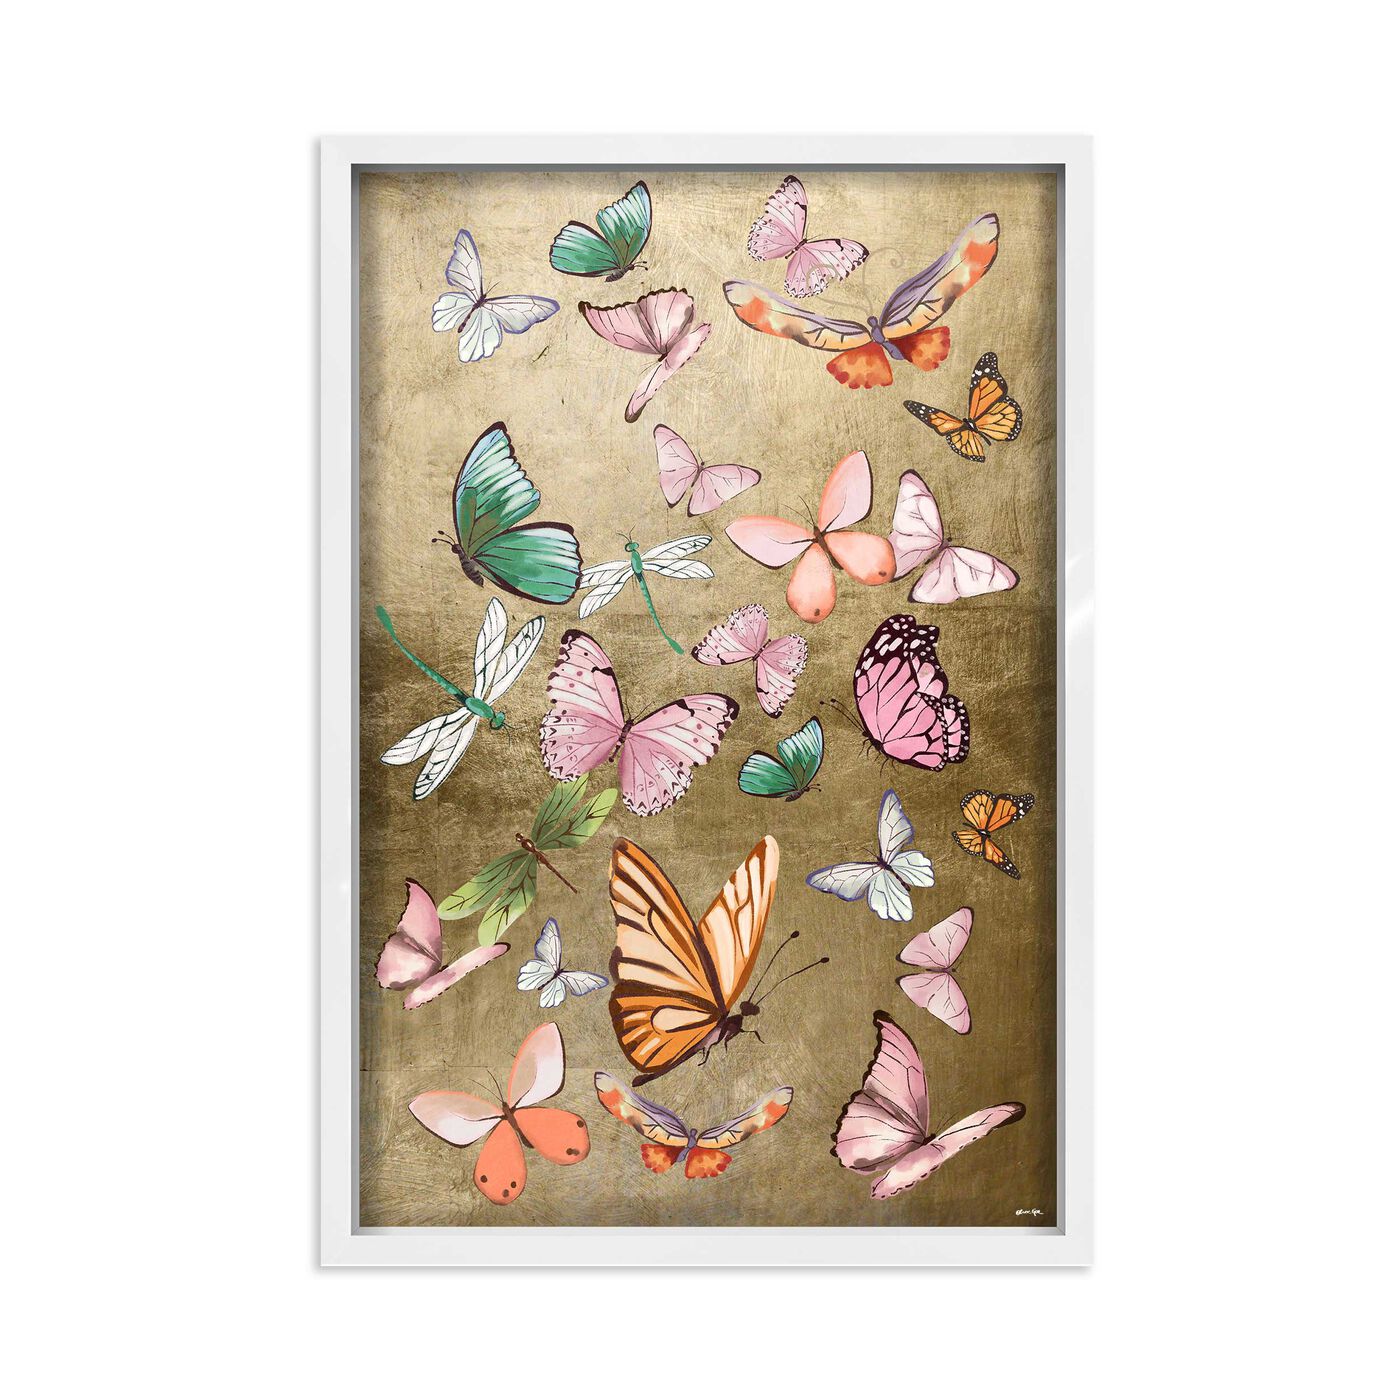 Gold - Over Animals Flying With Gal Hand-Applied Art Oliver | The Leaf by Gold Wall